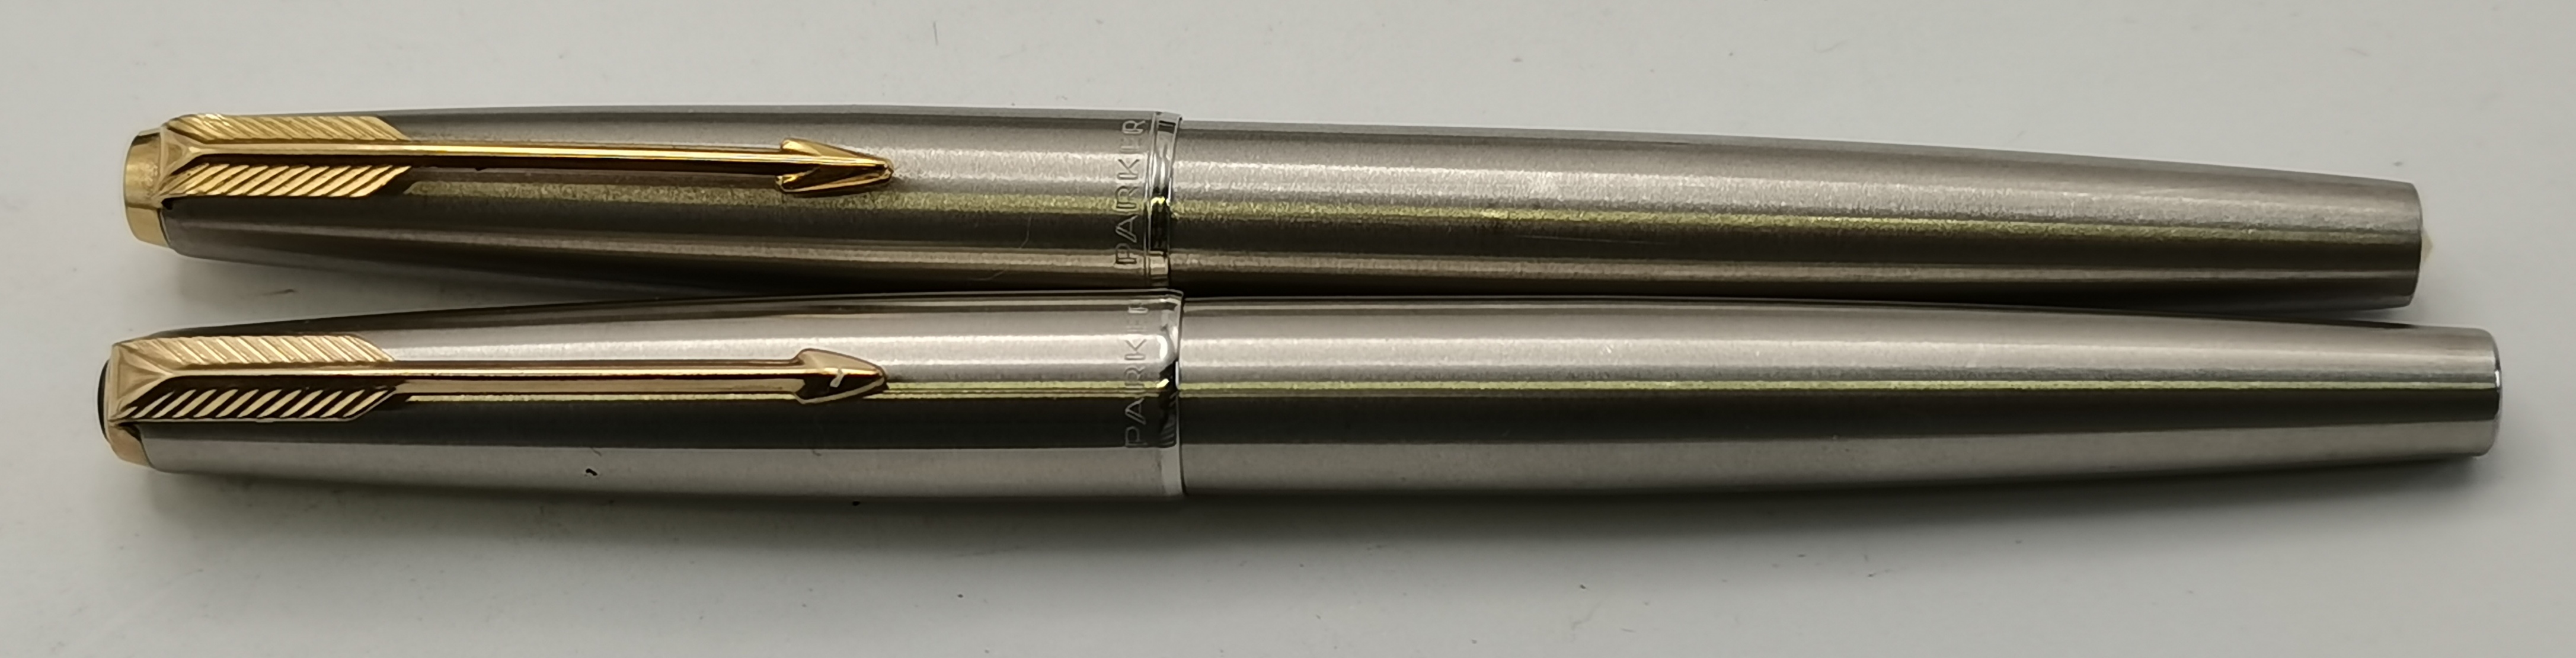 An original Parker '51' fountain pen, and two others with 14k nibs - Image 5 of 5